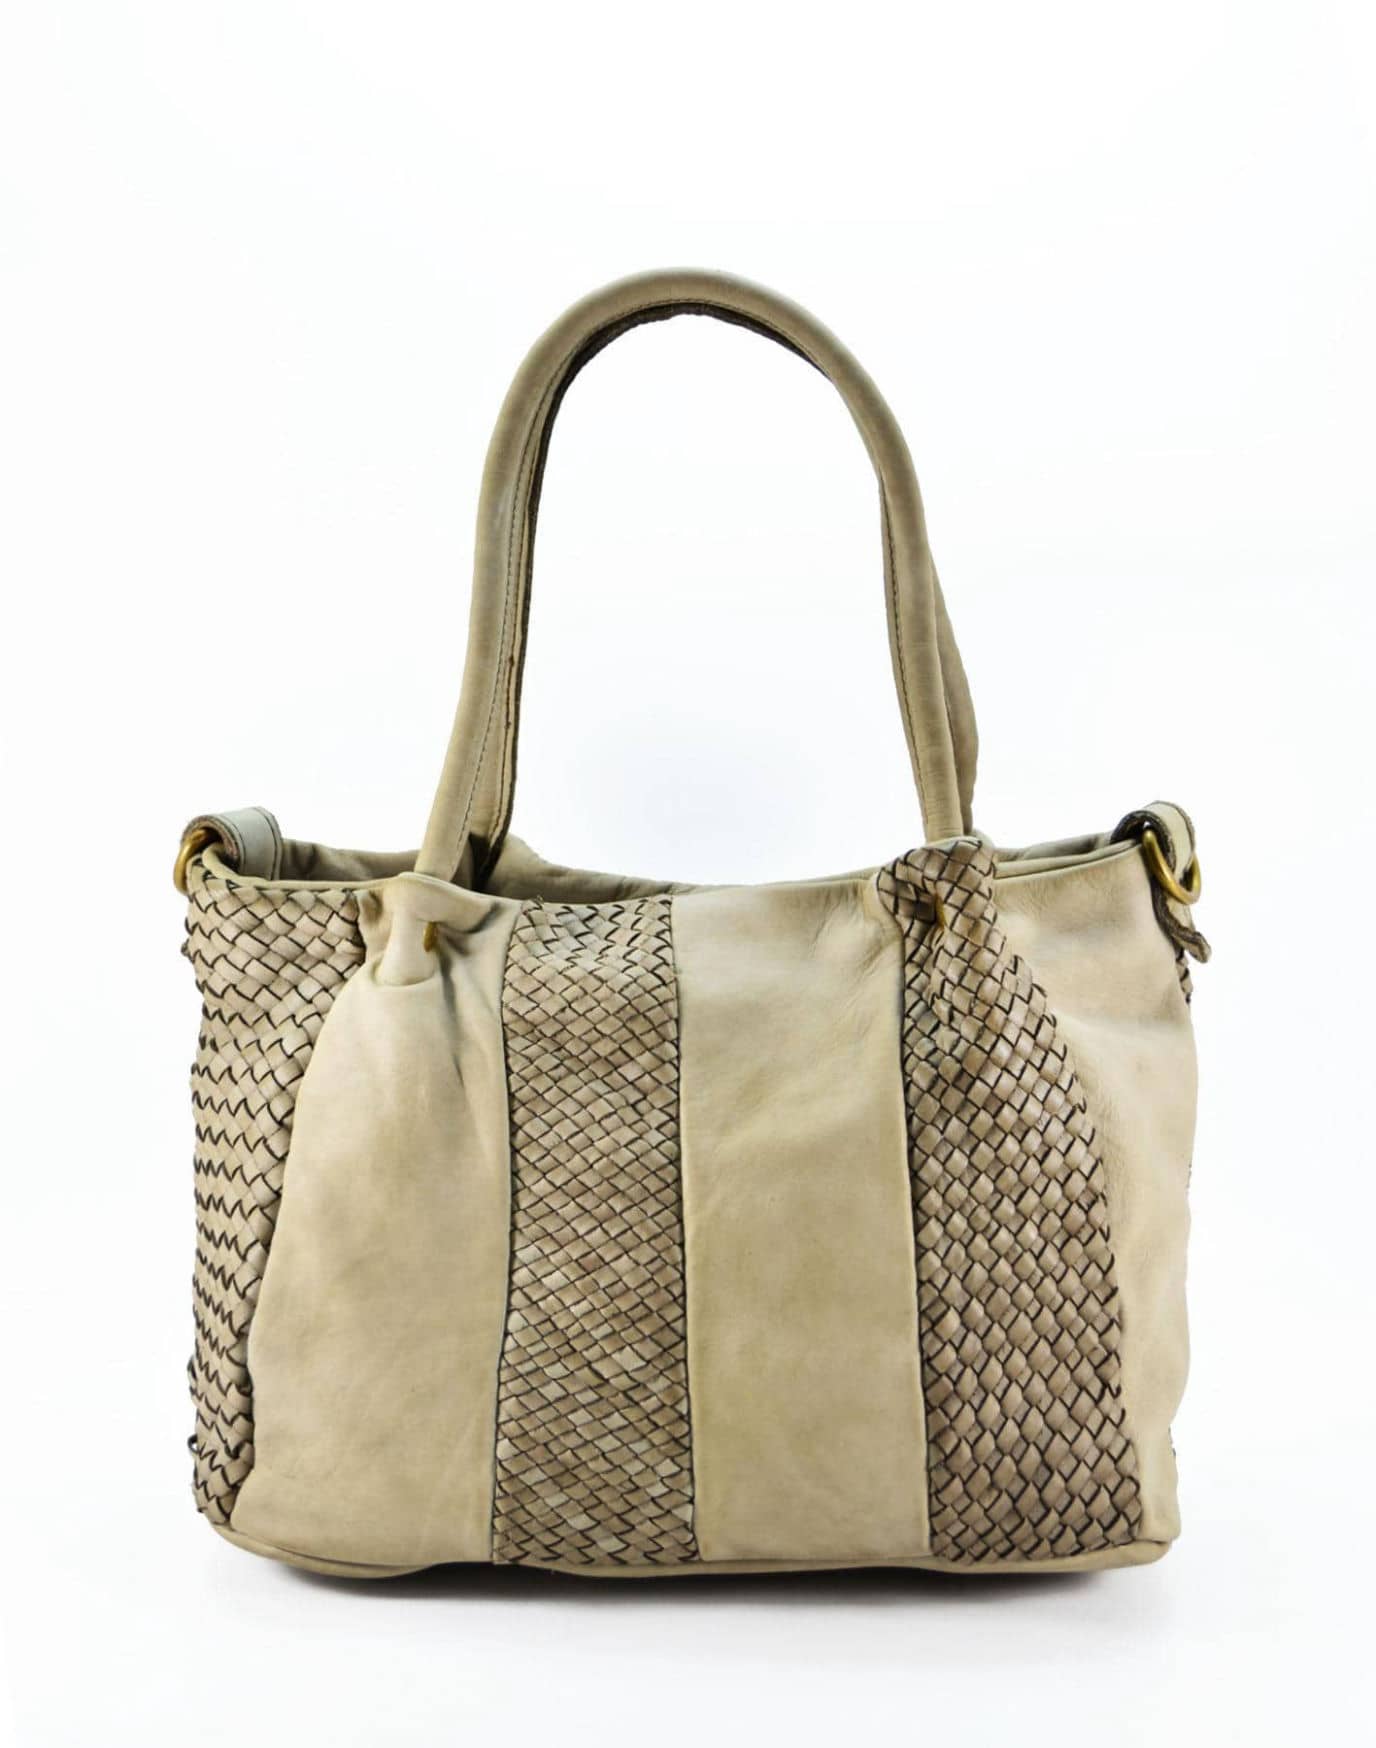 Italian wholesale suppliers, brands, and manufacturers of luxury bags and leather goods